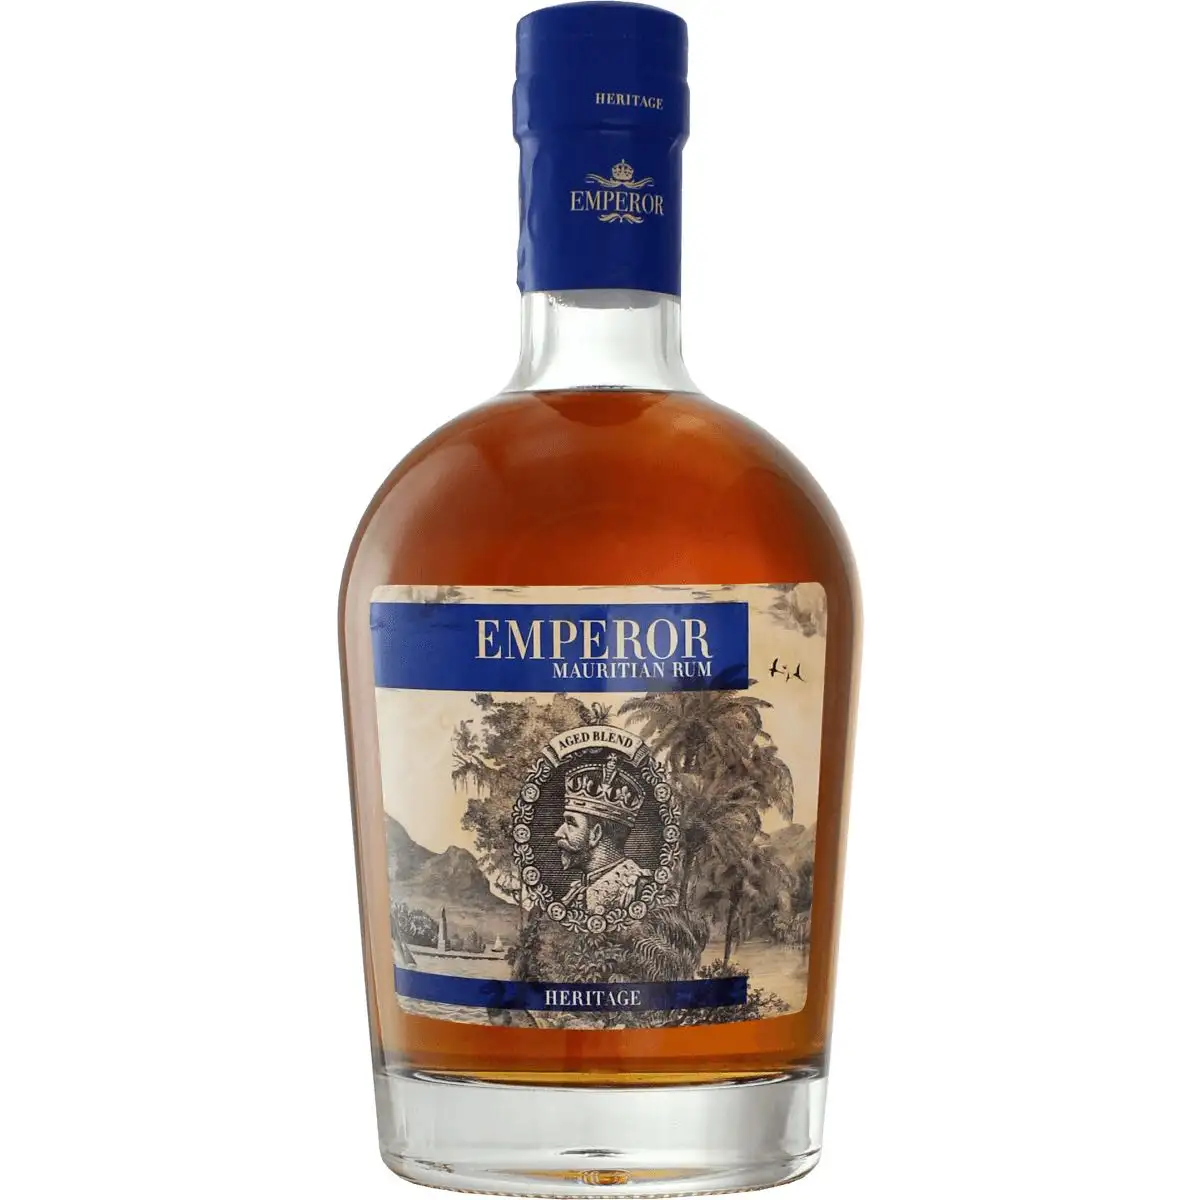 Image of the front of the bottle of the rum Heritage